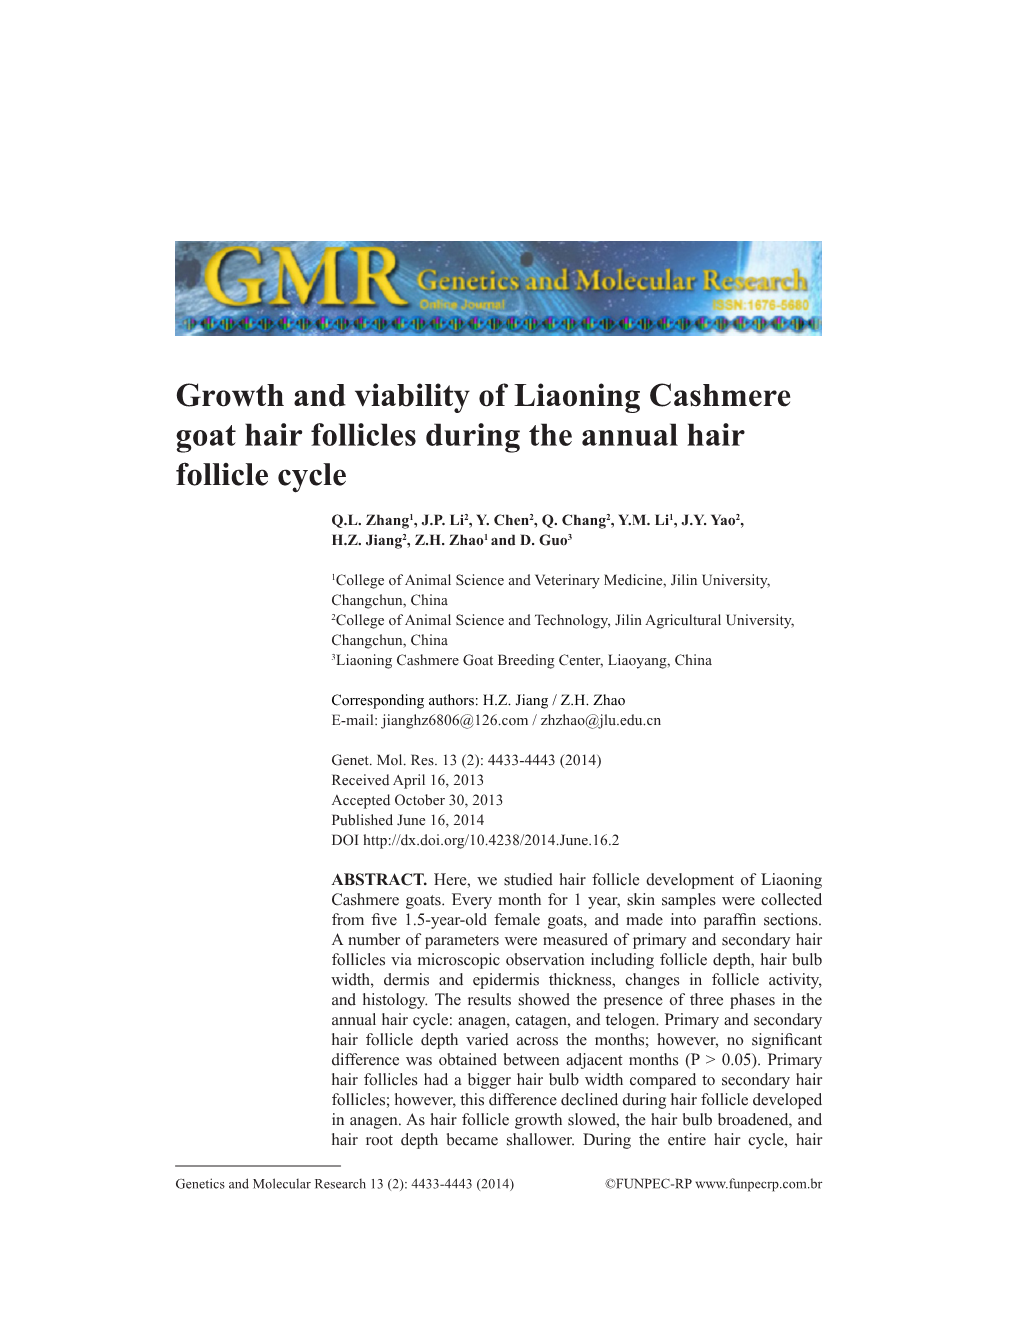 Growth and Viability of Liaoning Cashmere Goat Hair Follicles During the Annual Hair Follicle Cycle